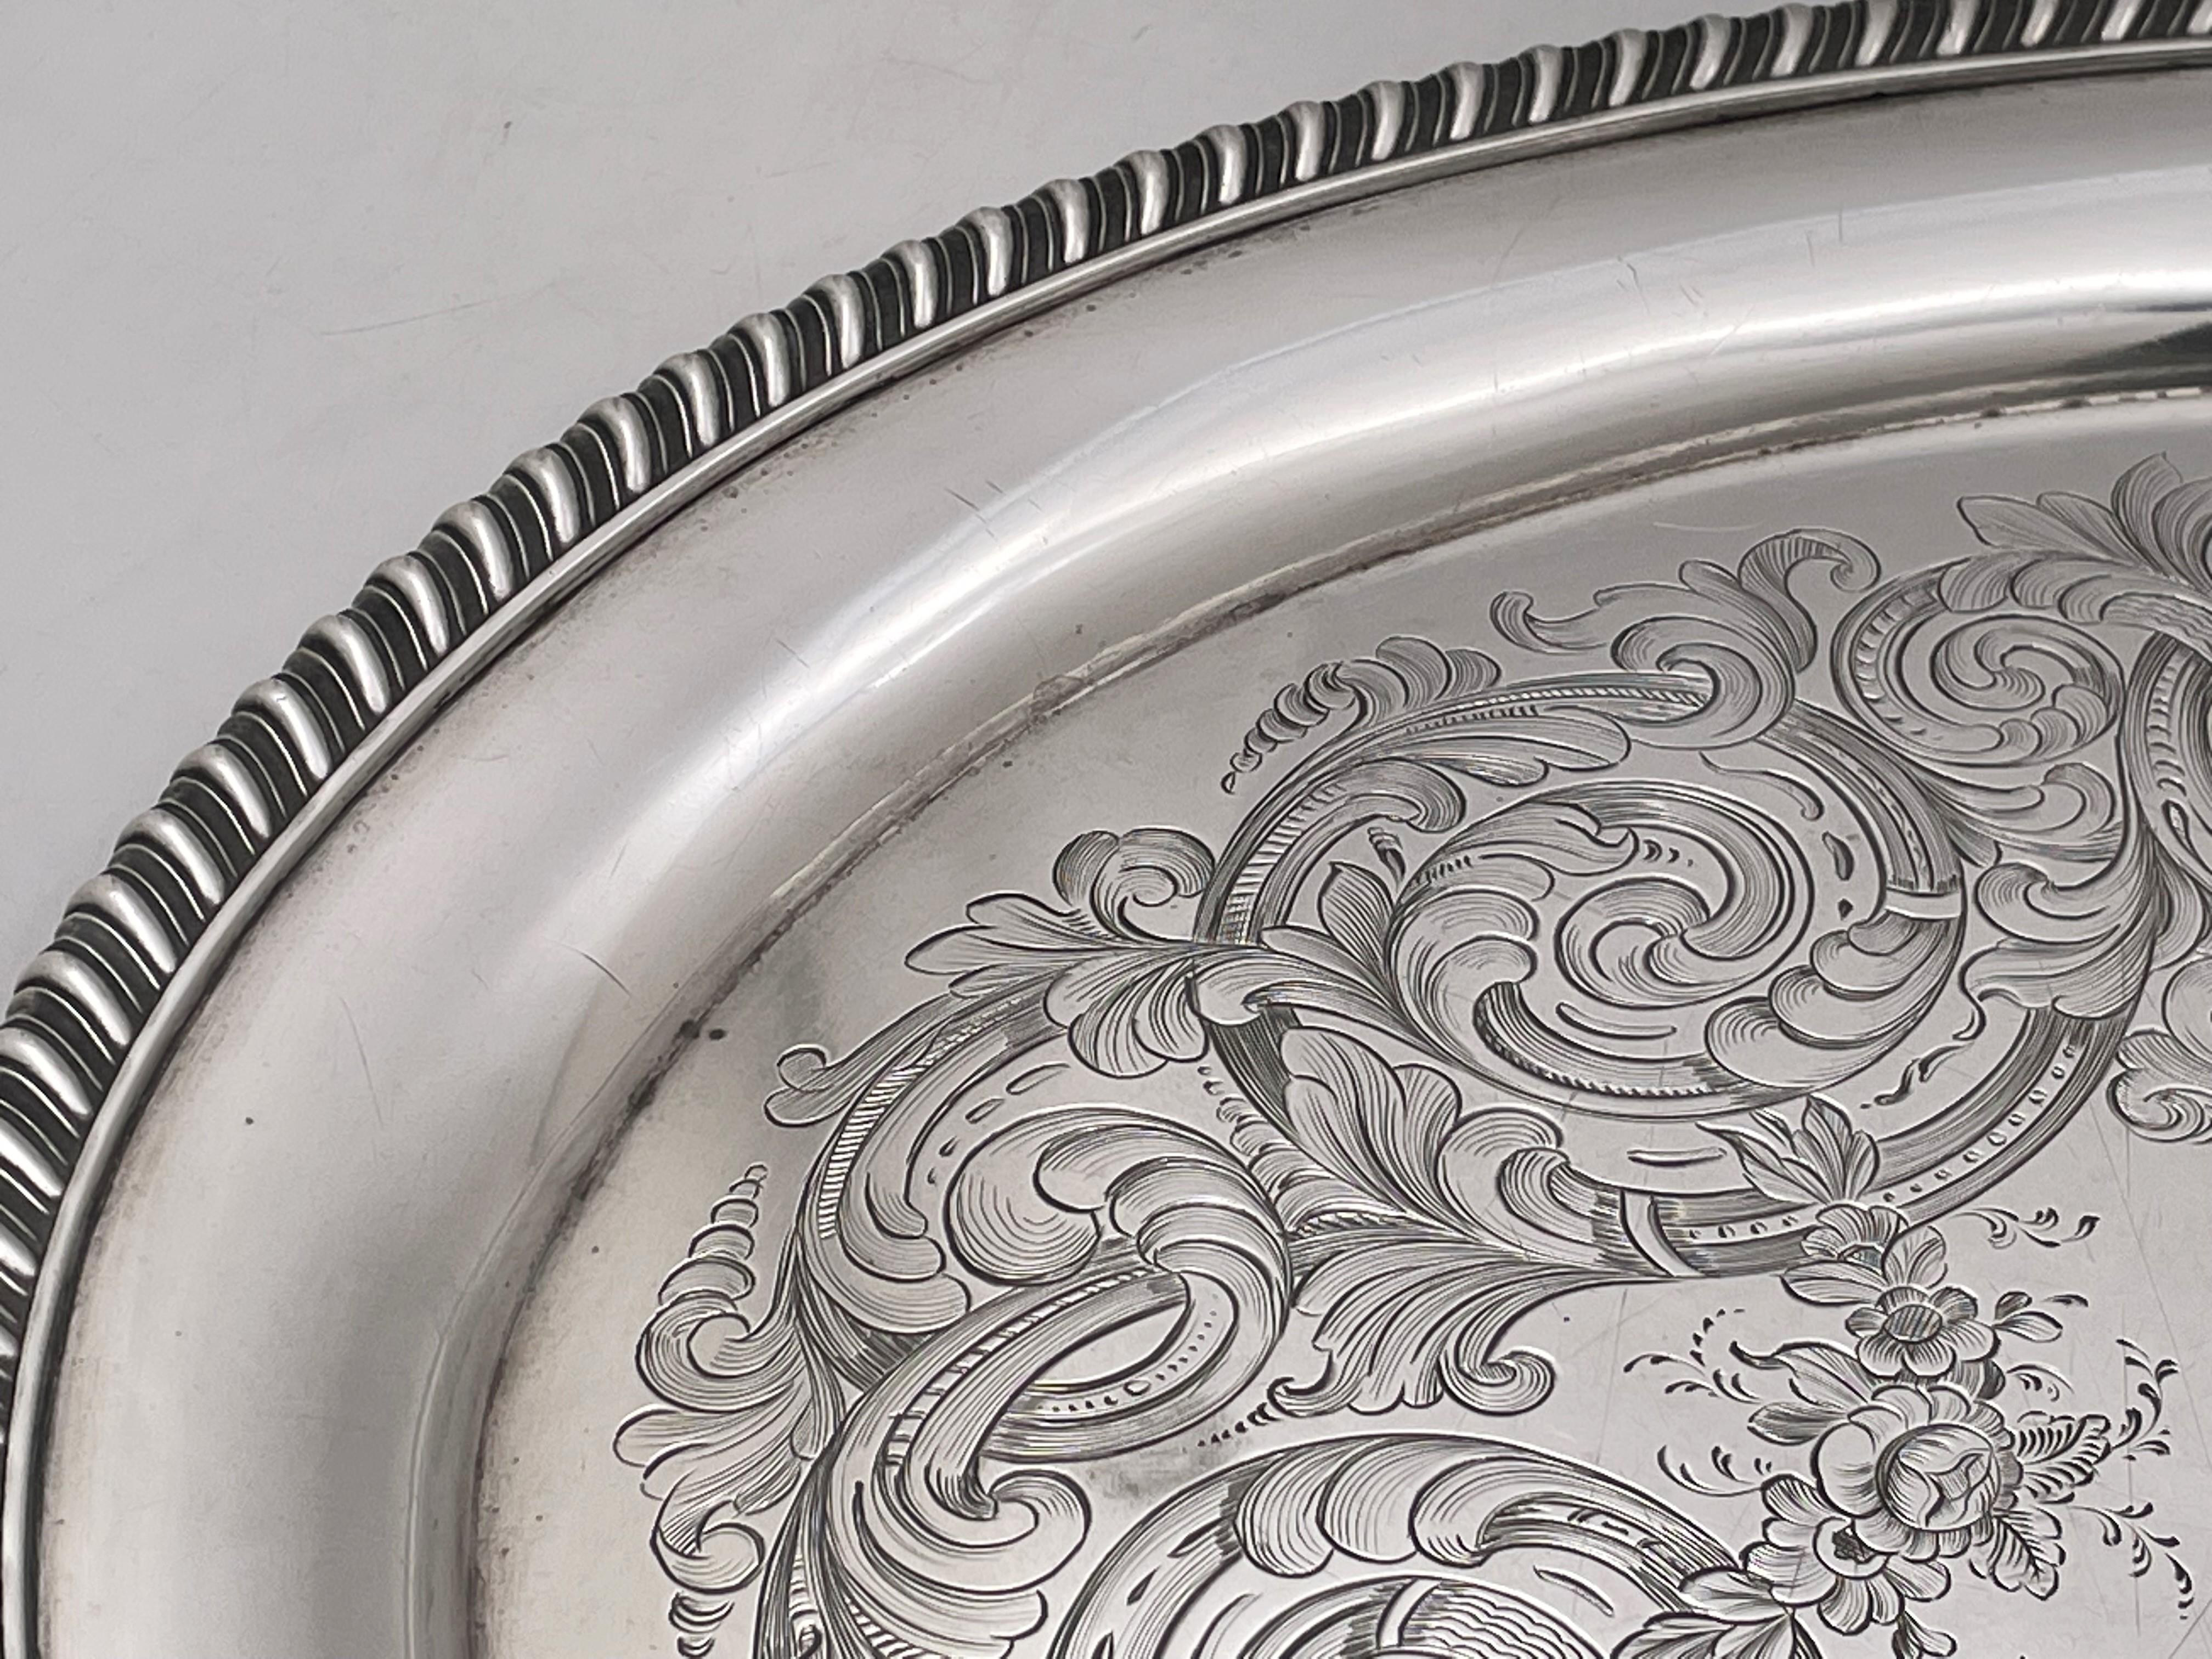 Wilson Silver Platter/ Tray from Mid-19th Century for Ivy League UPenn Alum For Sale 1